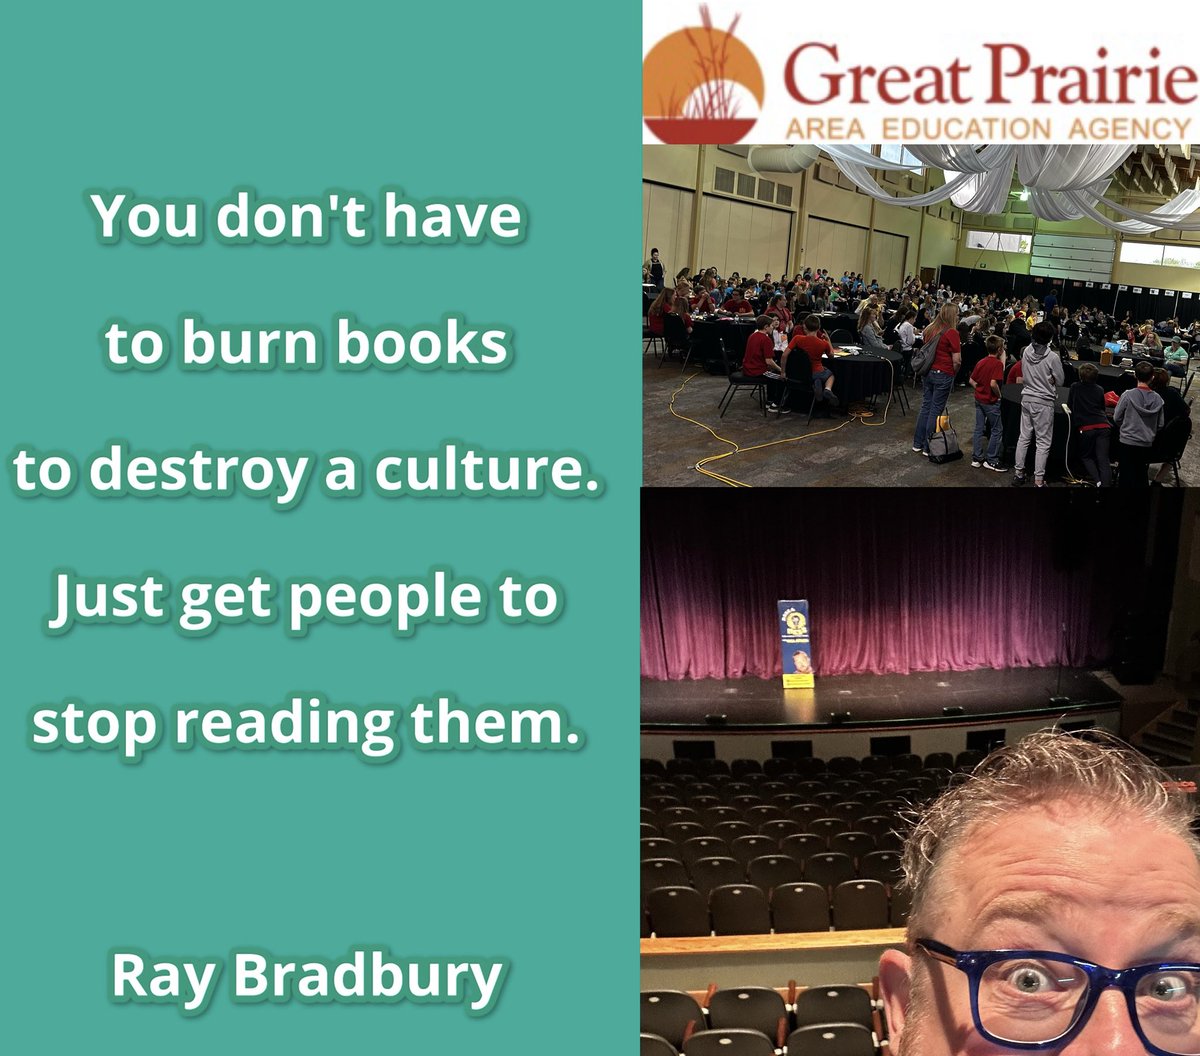 Today’s #WaltWednesday comes from Walt’s pal Ray Bradbury. I thought about it this morning as I provided entertainment for a Battle of the Books event in Iowa. This room is filled with students that are avid readers. Being there made this former children’s librarian very happy.